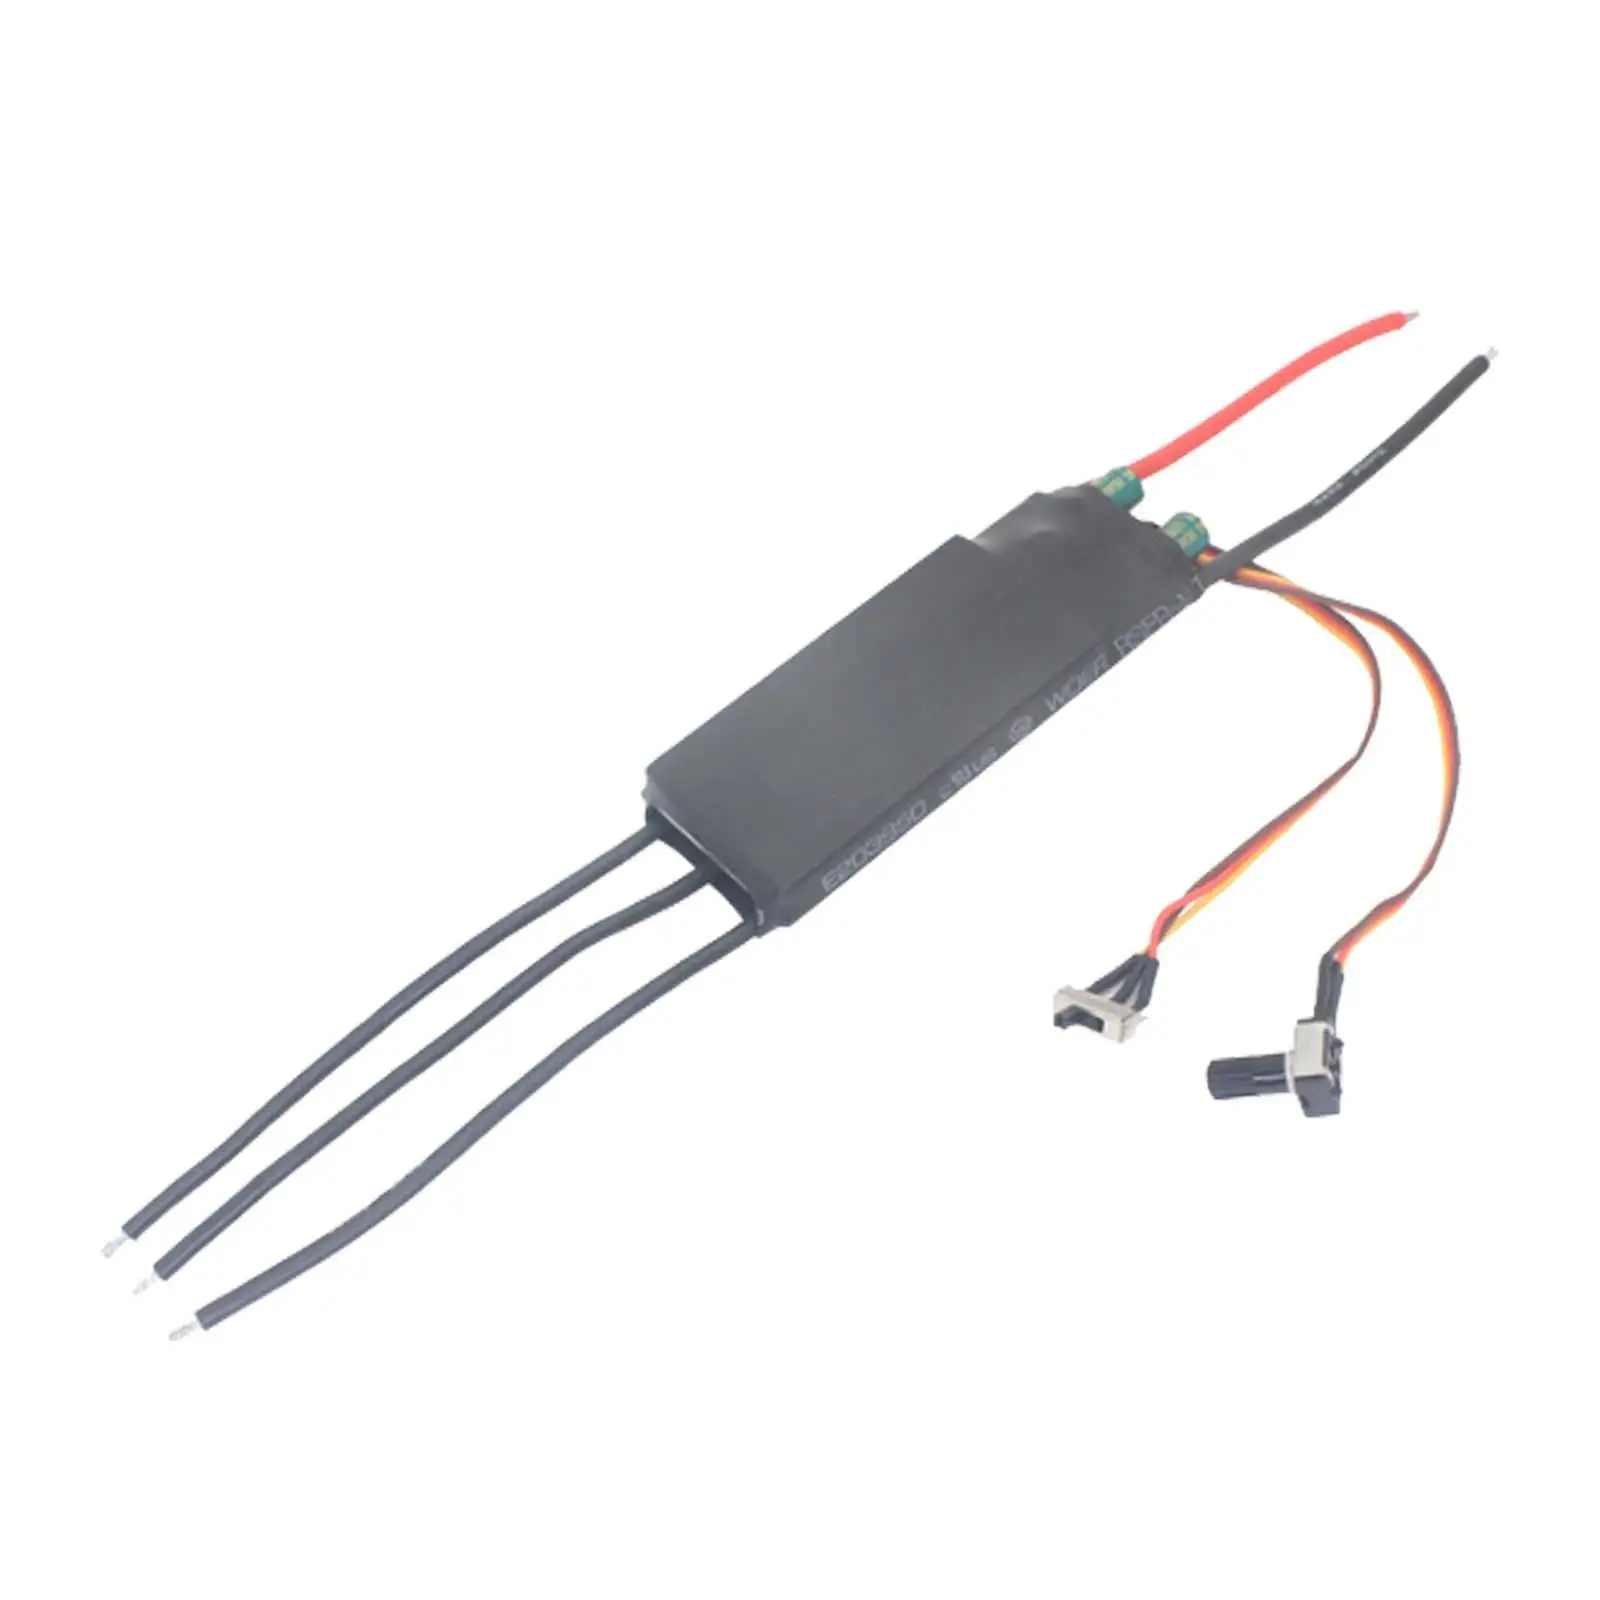 Motor Speed Controller 3 Phase Bldc Controller Brushless Hallless Motor for Water Pumps Fans Air Pumps Oil Pumps Parts